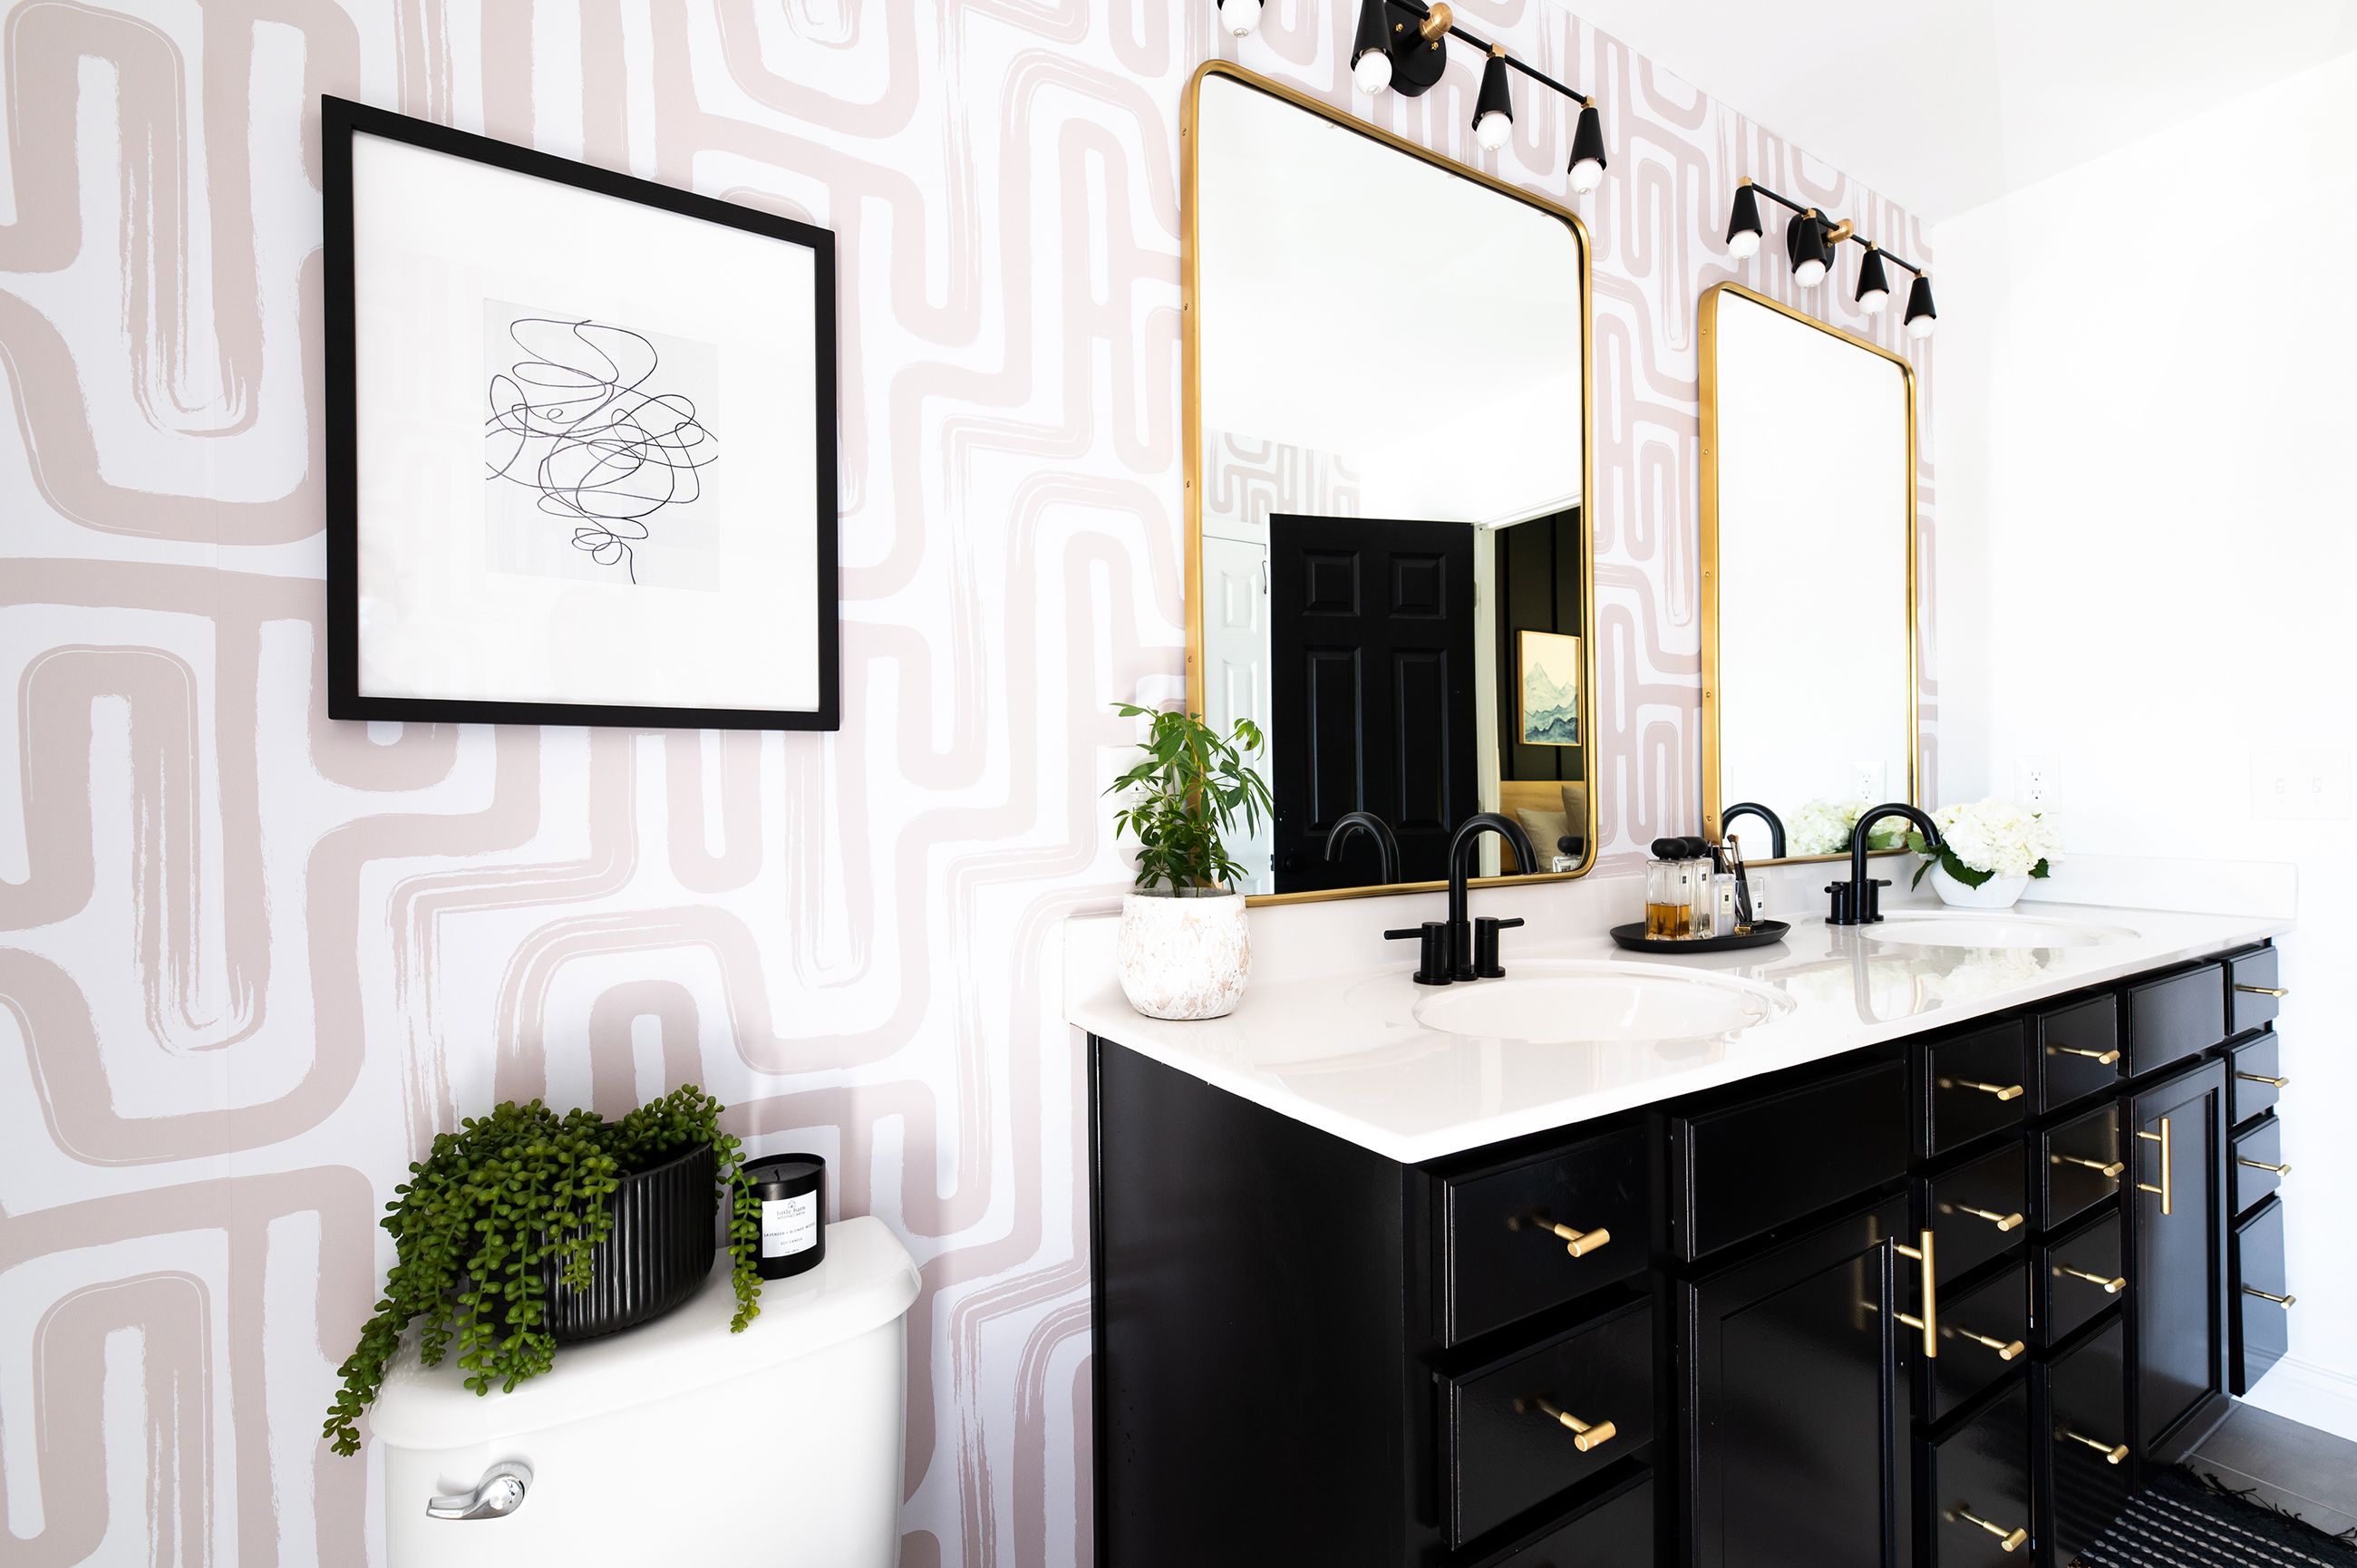 Why Should You Renovate Your Bathroom With Vanity Mirrors